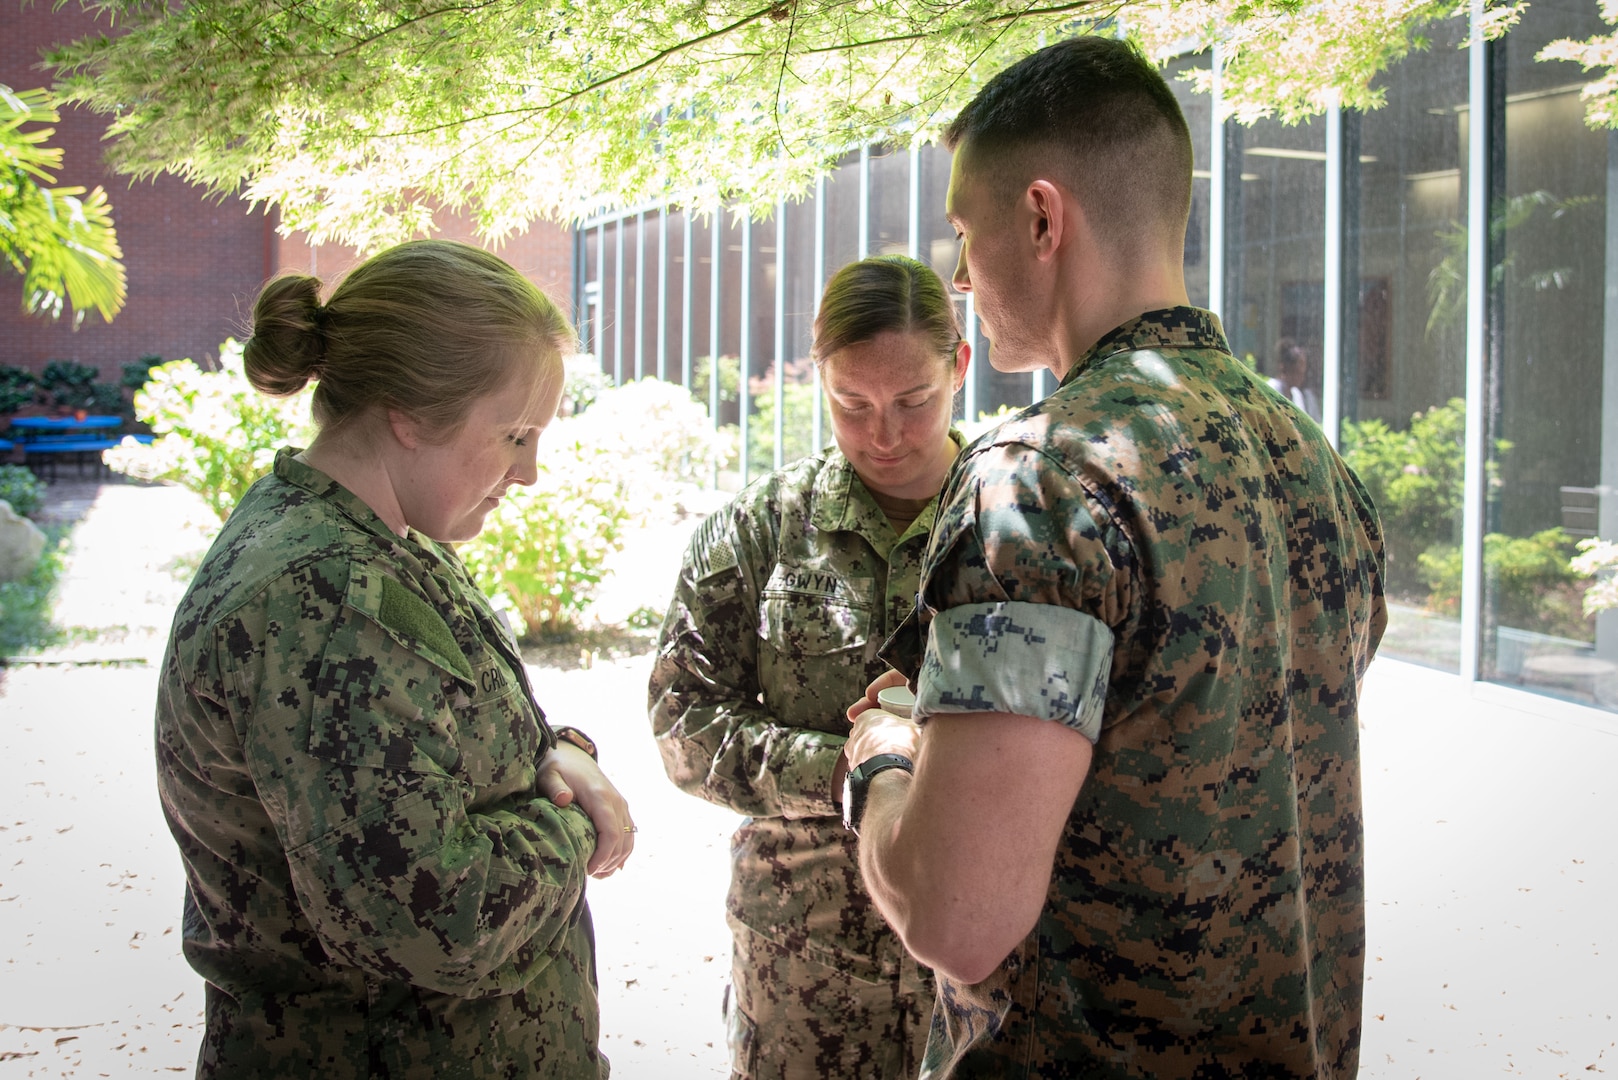 Navy Chaplain Lieutenant Kyle Lambertson, right, prays with Navy Lieutenants Sara Cruz, left, and Amanda Gwyn, center, during a Blessing of the Hands ceremony conducted Tuesday, May 9 aboard Naval Health Clinic Cherry Point.  

The ceremony, held as part of National Nurses Week, honored Sailors and civilians involved in patient care and administration aboard the facility.